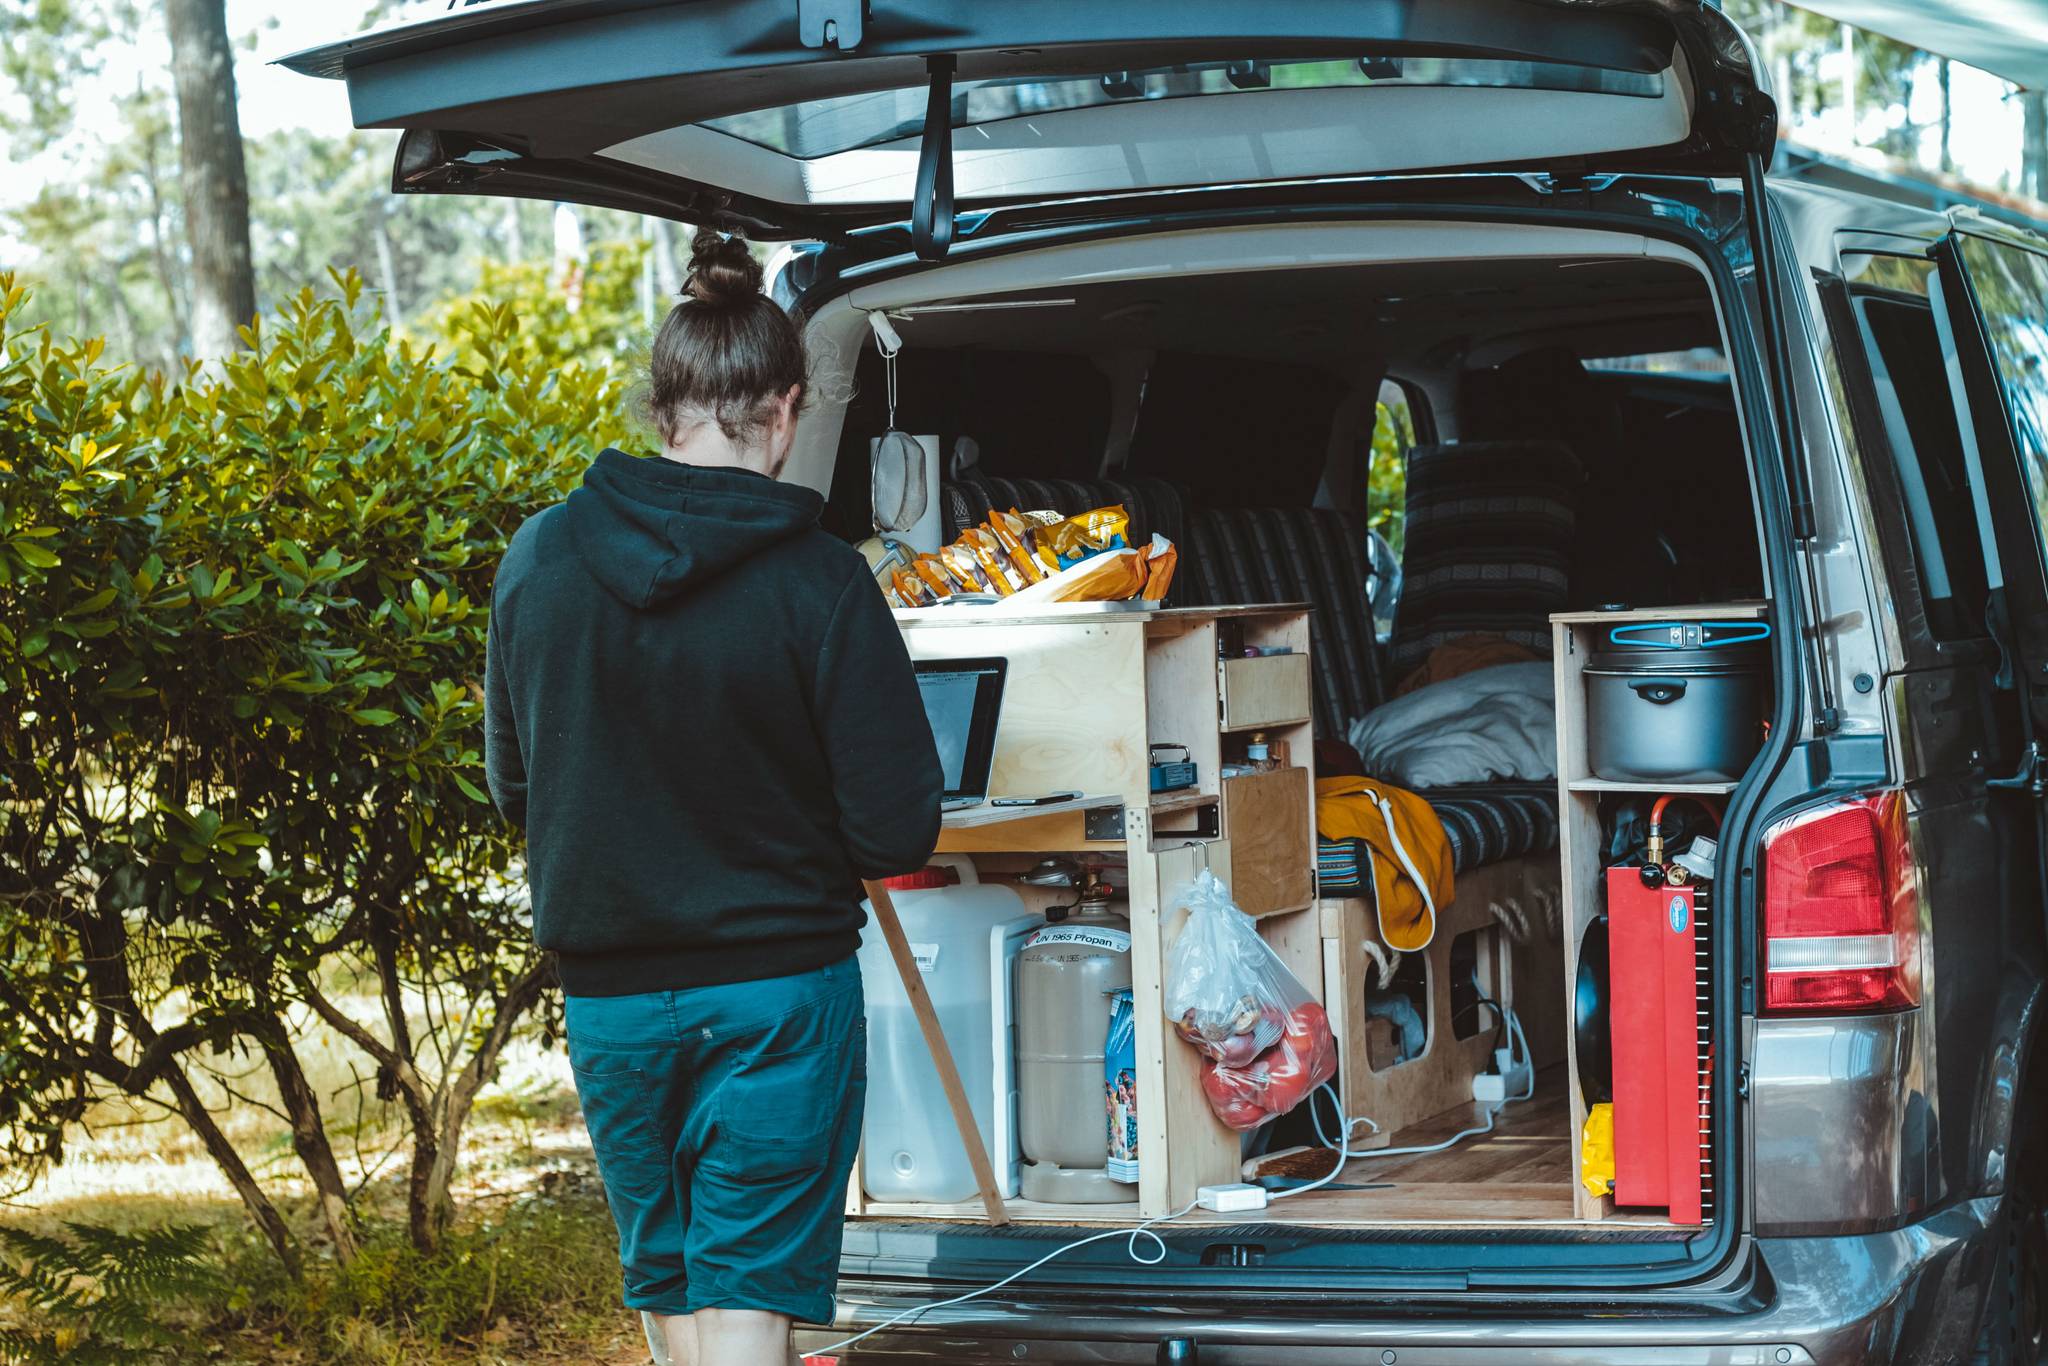 Why do Americans love road tripping in RVs?